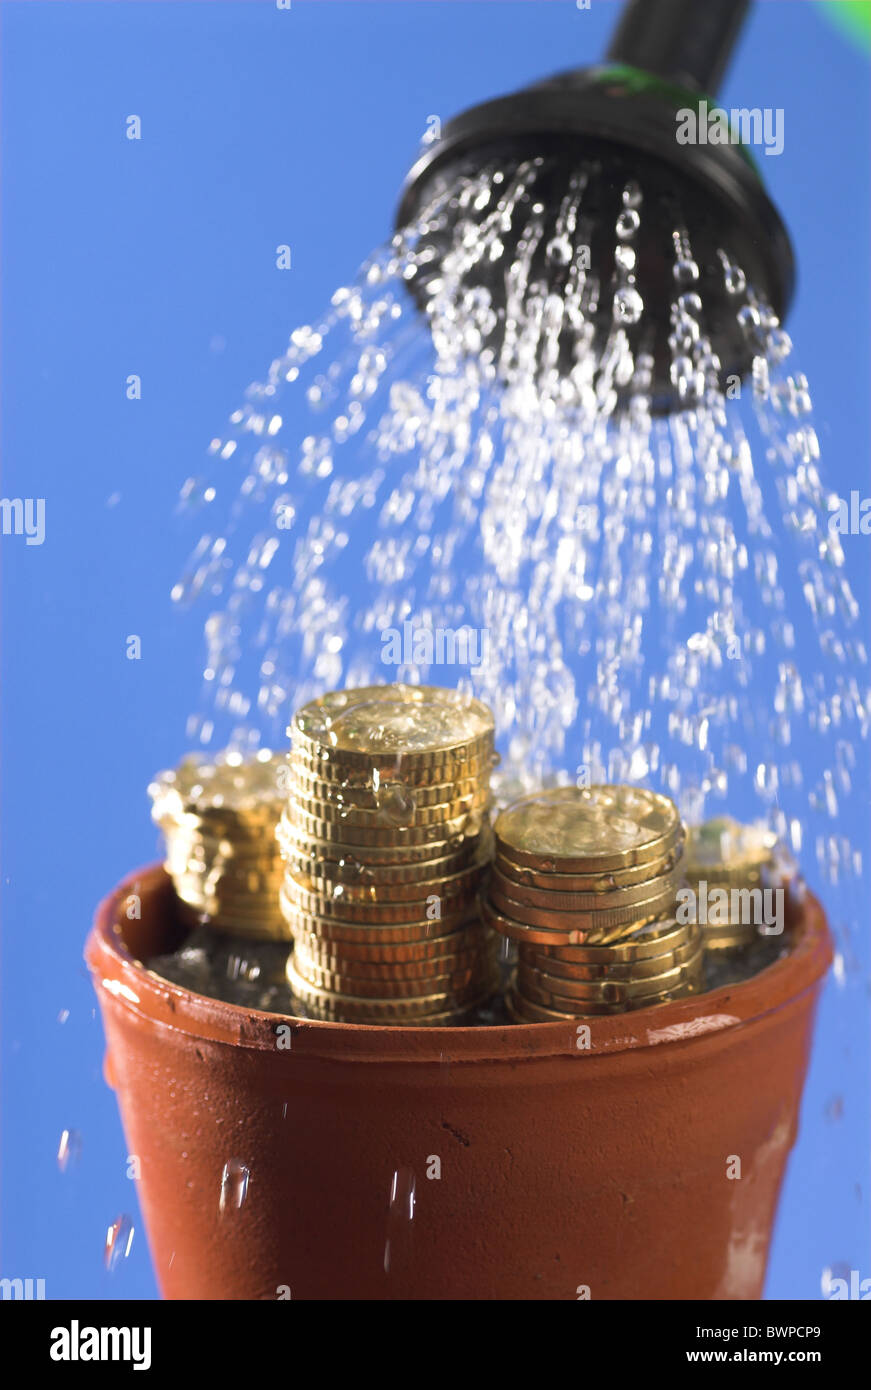 Money laundering Symbol Concept Flower pot Coins Coins Currency Water Shower Showering Sprinkler Finance F Stock Photo